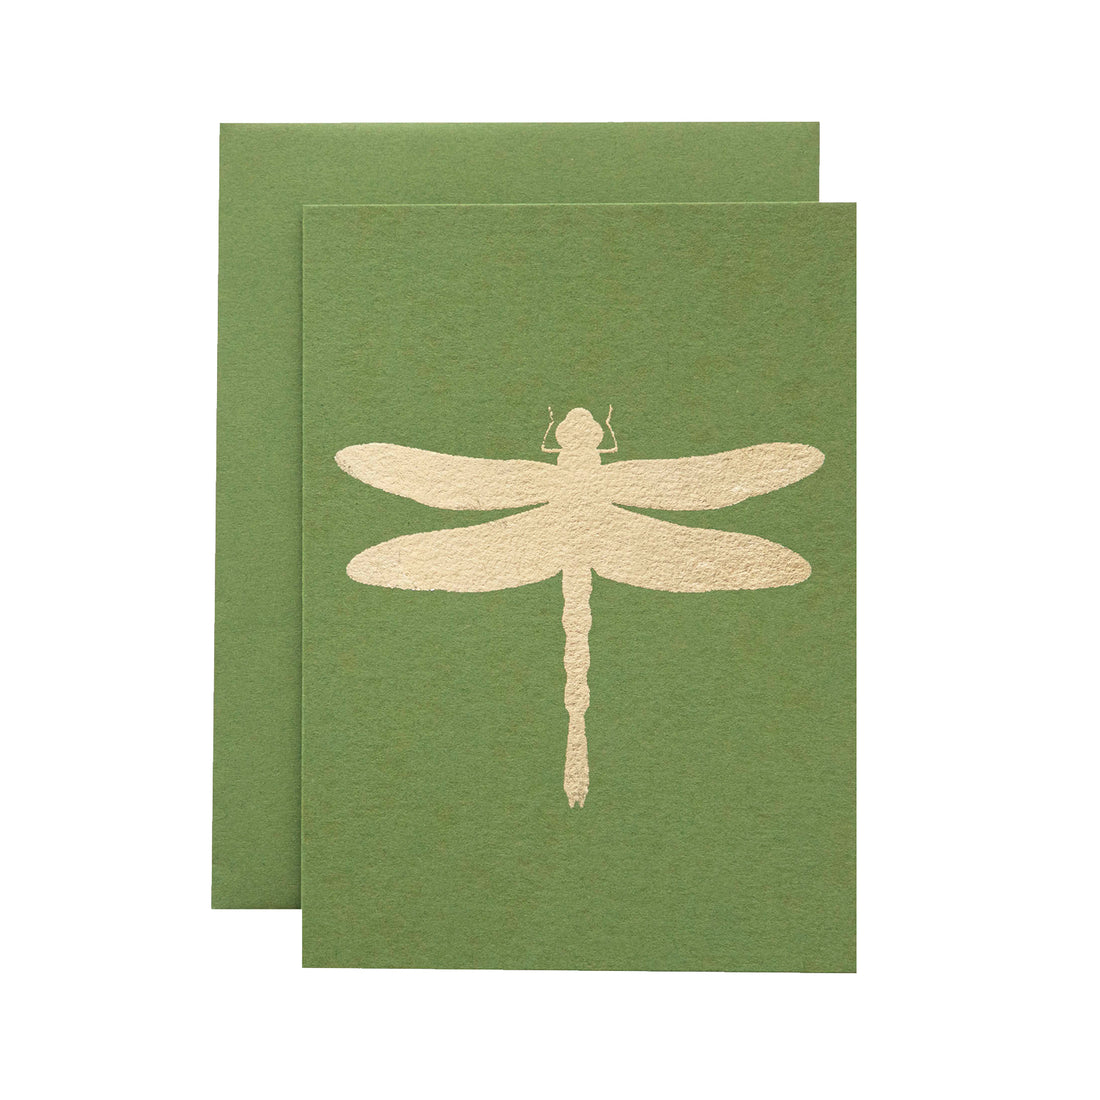 A leaf-green card with the silhouette of a dragonfly in solid gold leaf.